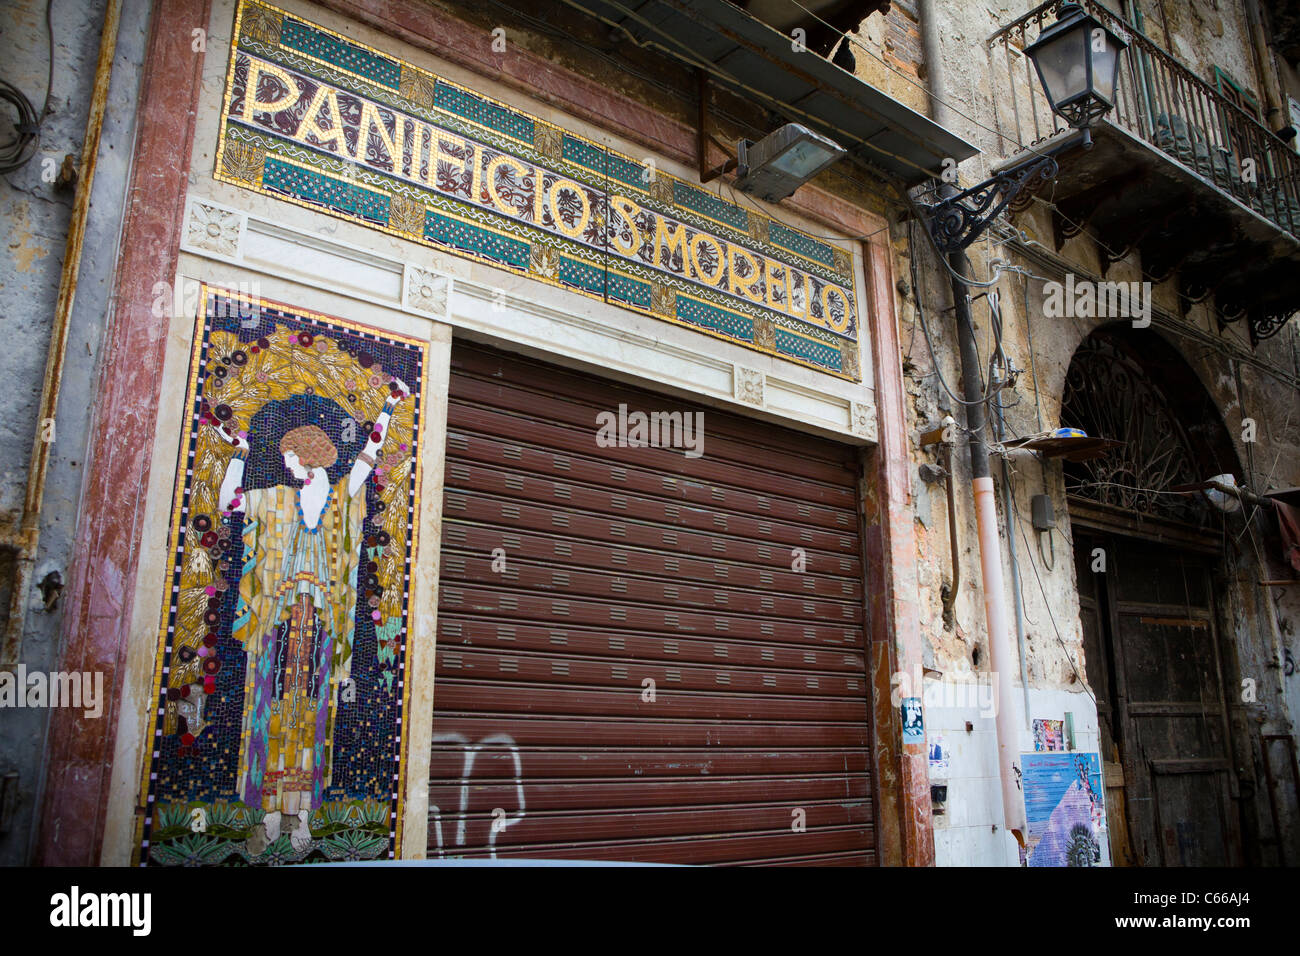 Beautiful vintage bakery shop facade and front door in Palermo, Sicily, Italy, Europe. Stock Photo